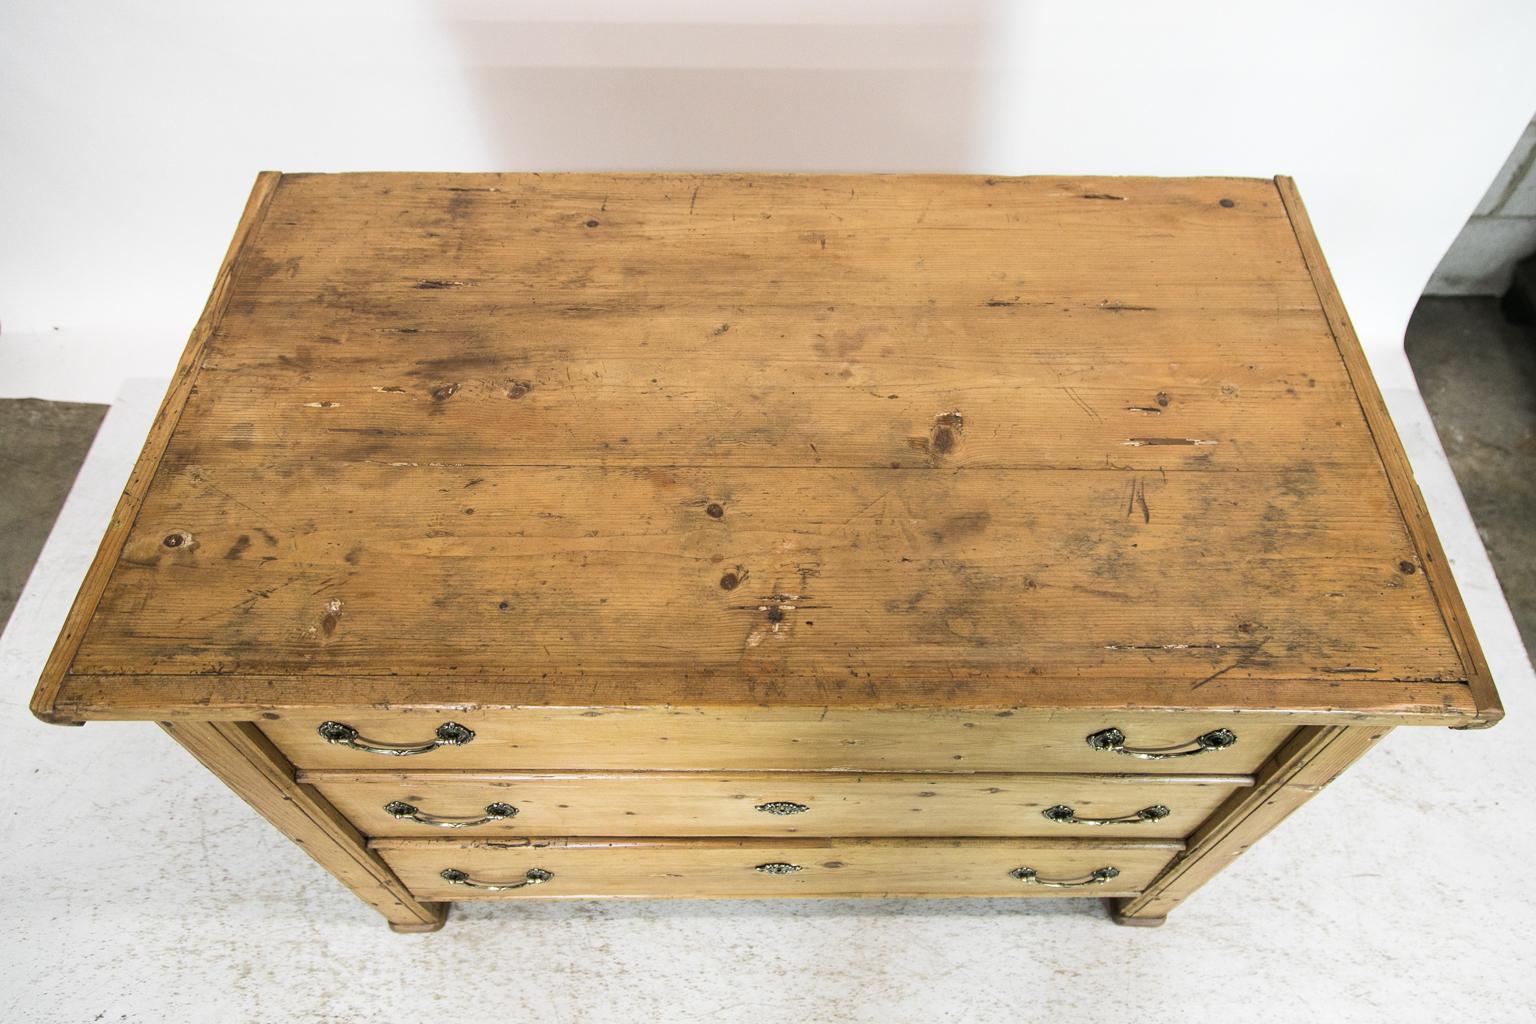 This Central European blanket chest has a front that simulates a three-drawer chest. The top two drawers are dummies while the lower is a functioning drawer. The front and back have exposed dovetail construction. The steel handles on the sides are